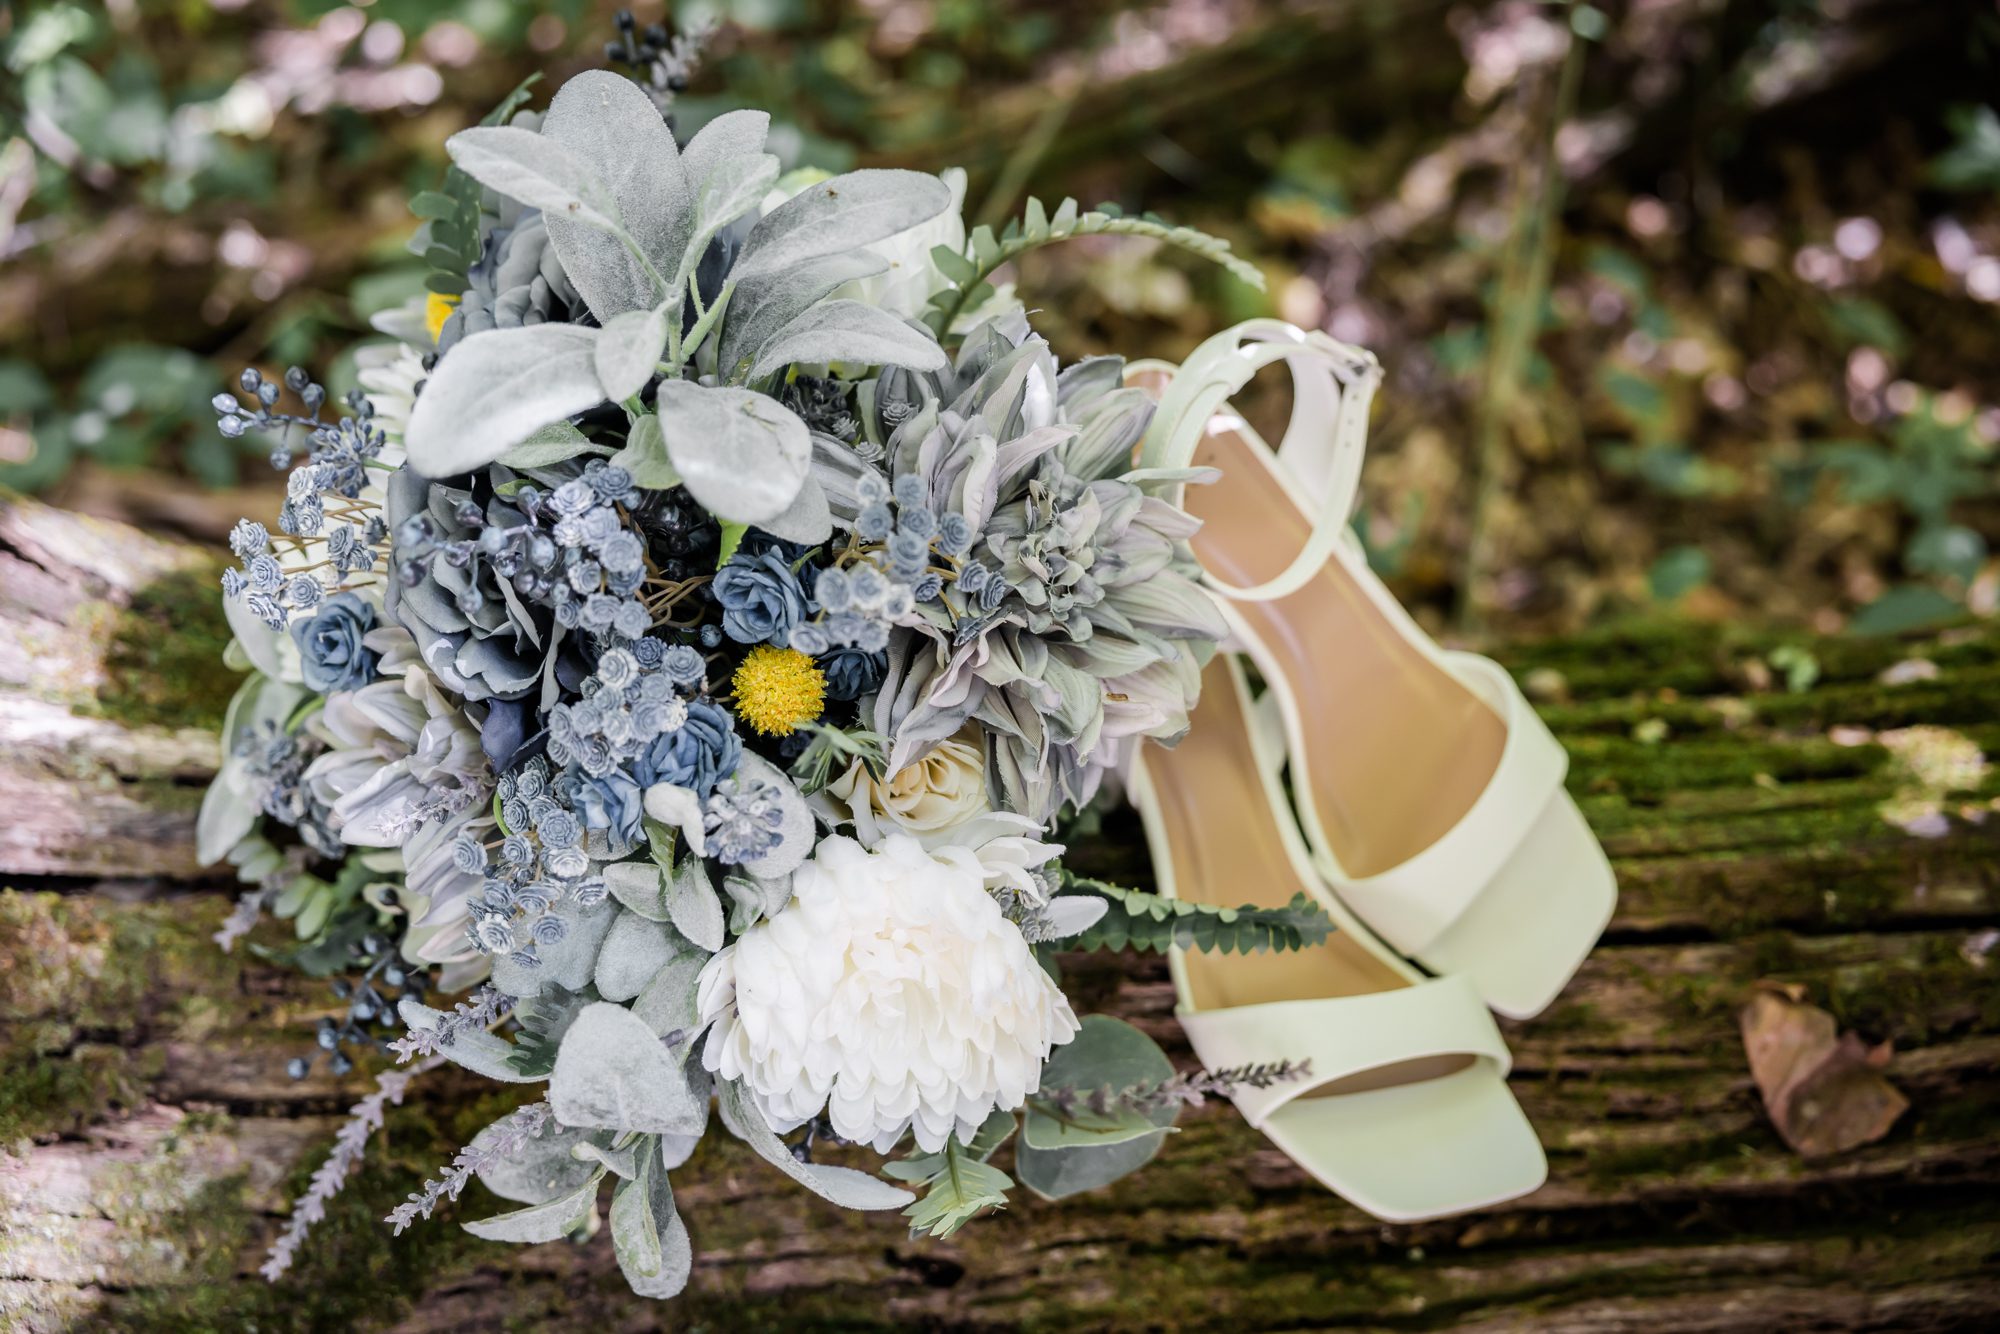 Late Summer Bouquet and Shoes